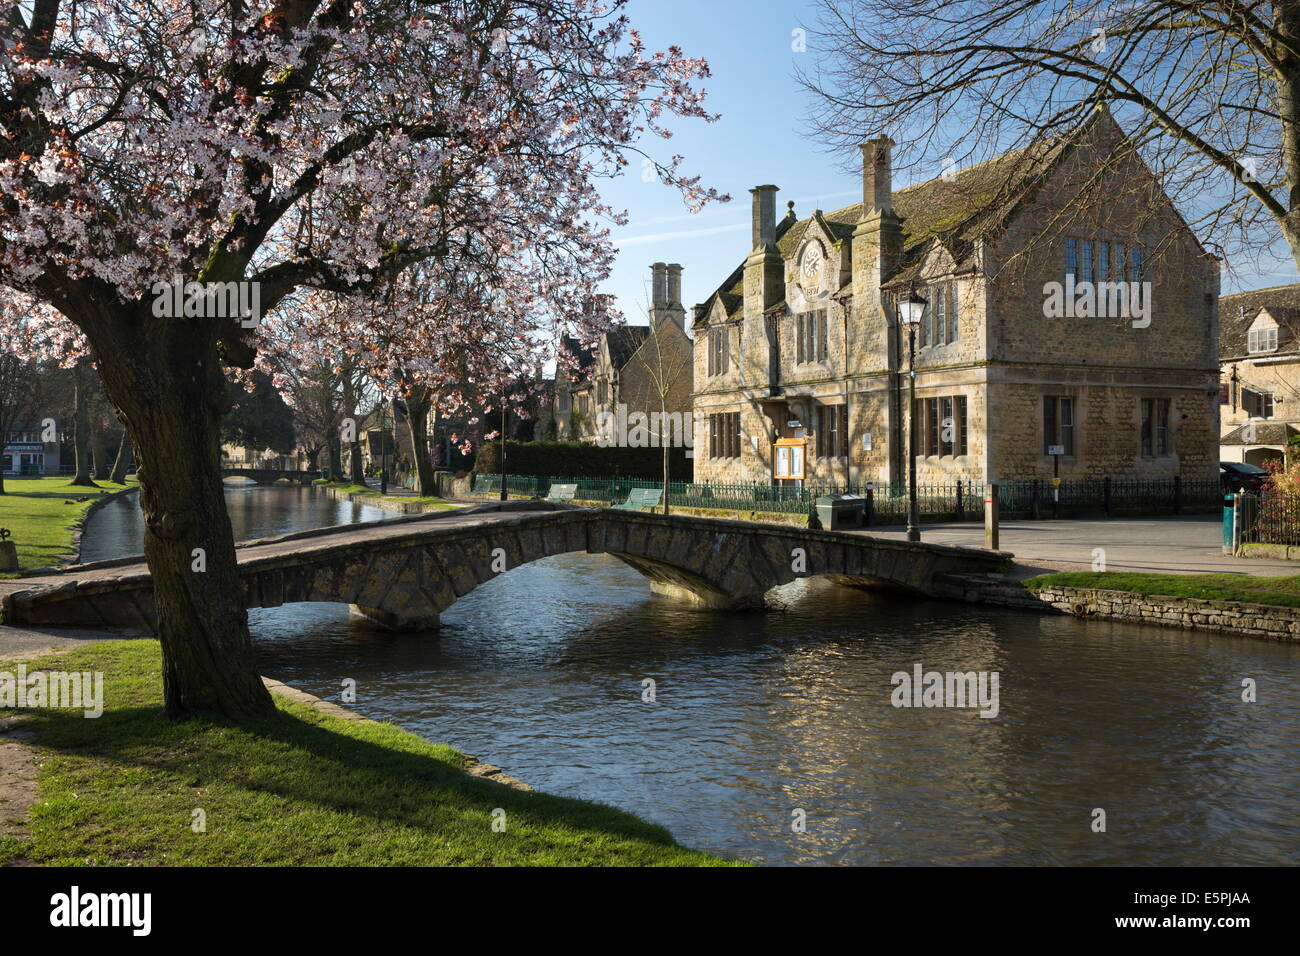 The Victoria Hall on the River Windrush, Bourton-on-the-Water, Cotswolds, Gloucestershire, England, United Kingdom, Europe Stock Photo